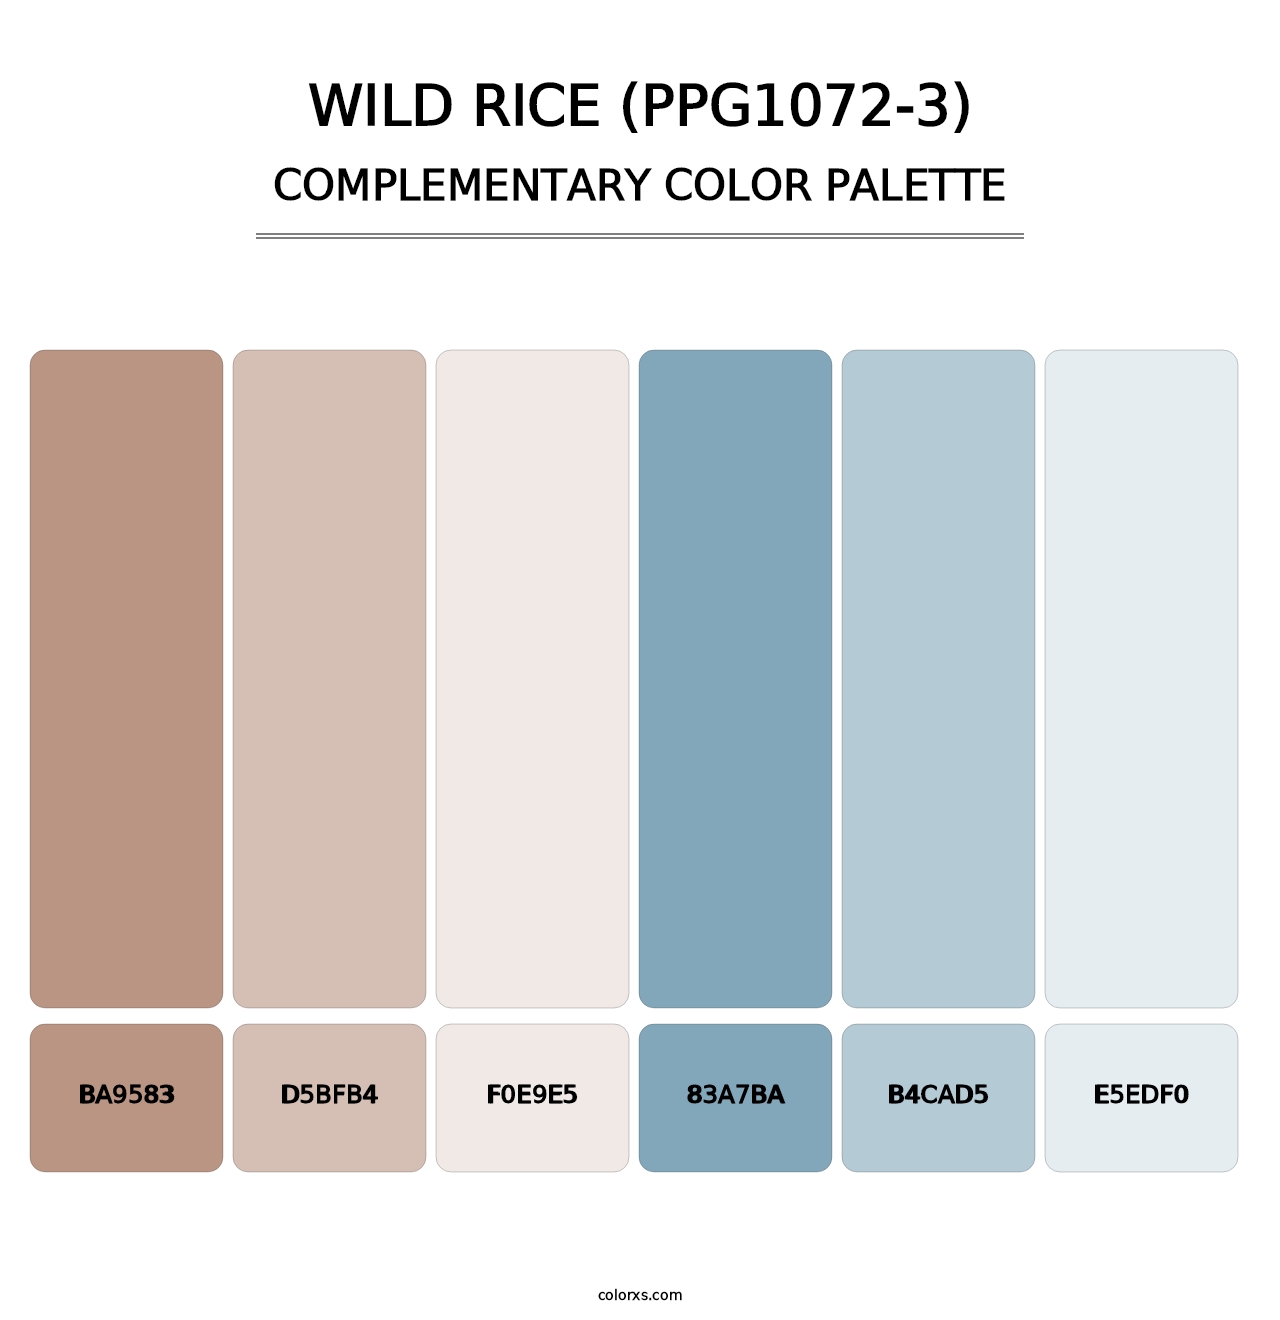 Wild Rice (PPG1072-3) - Complementary Color Palette